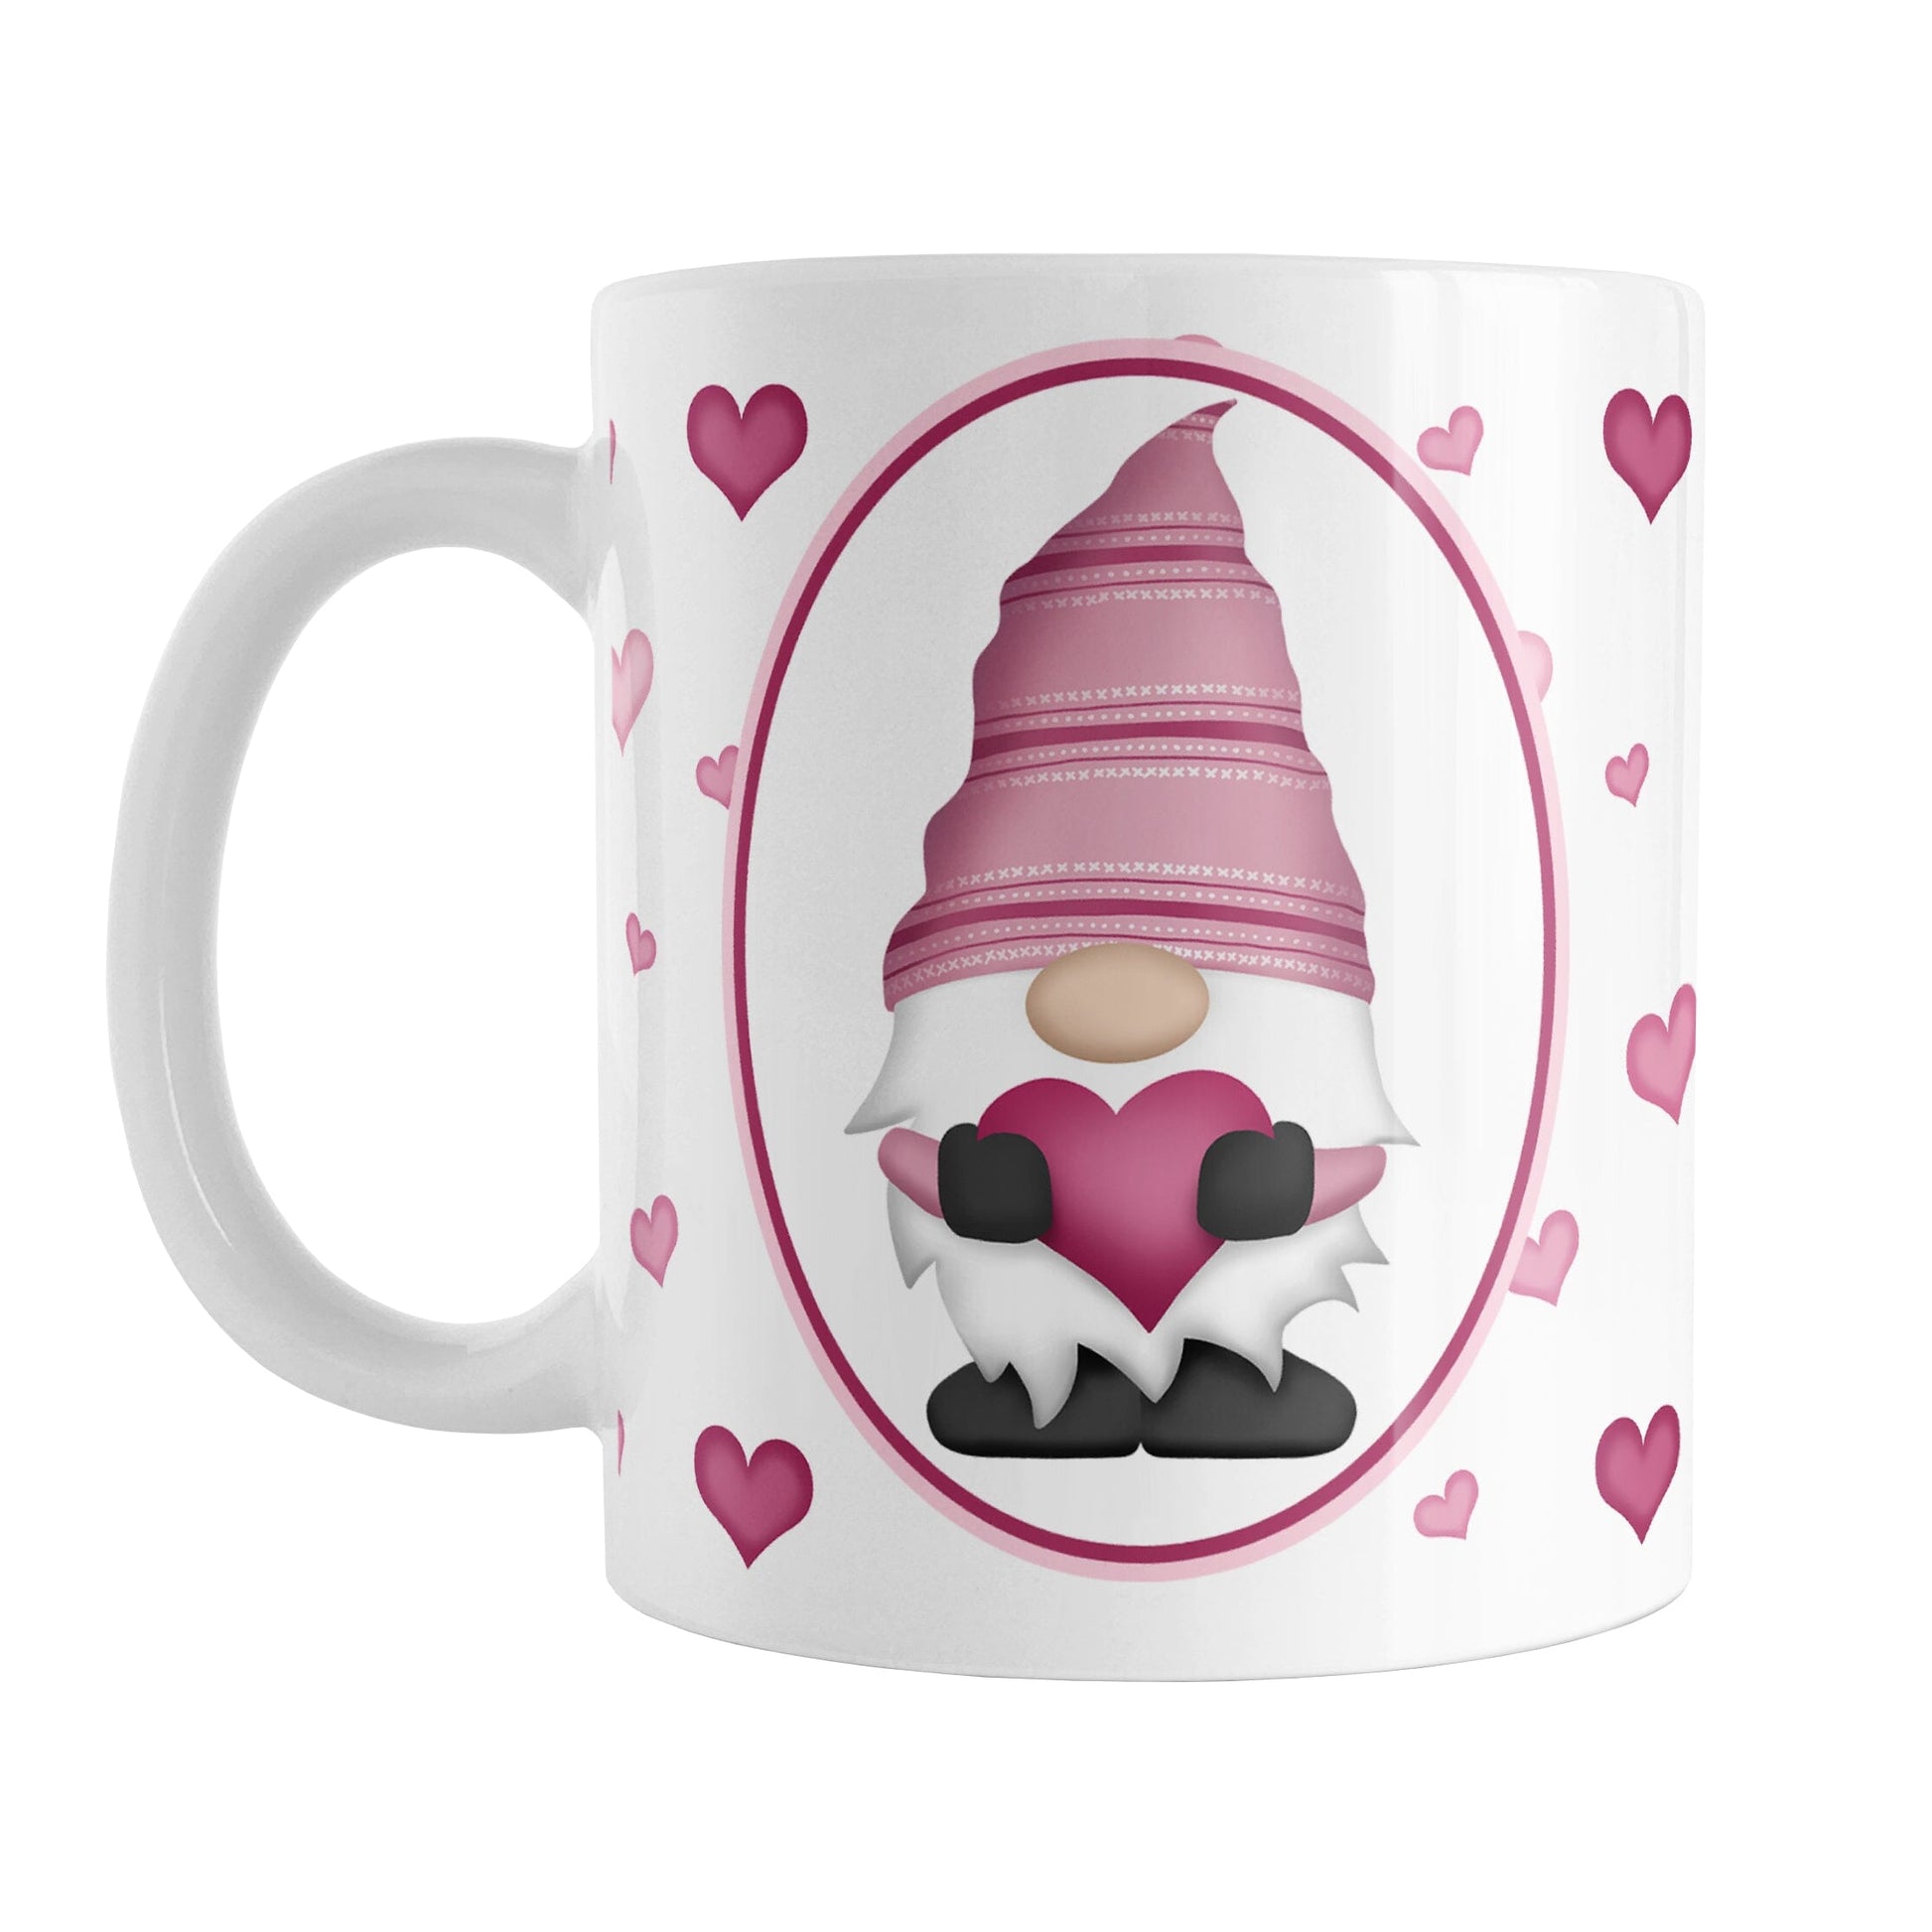 Pink Gnome Dainty Hearts Mug (11oz) at Amy's Coffee Mugs. A ceramic coffee mug designed with an adorable pink gnome in a white oval on both sides of the mug over a pattern of cute dainty hearts in different shades of pink that wrap around the mug to the handle.